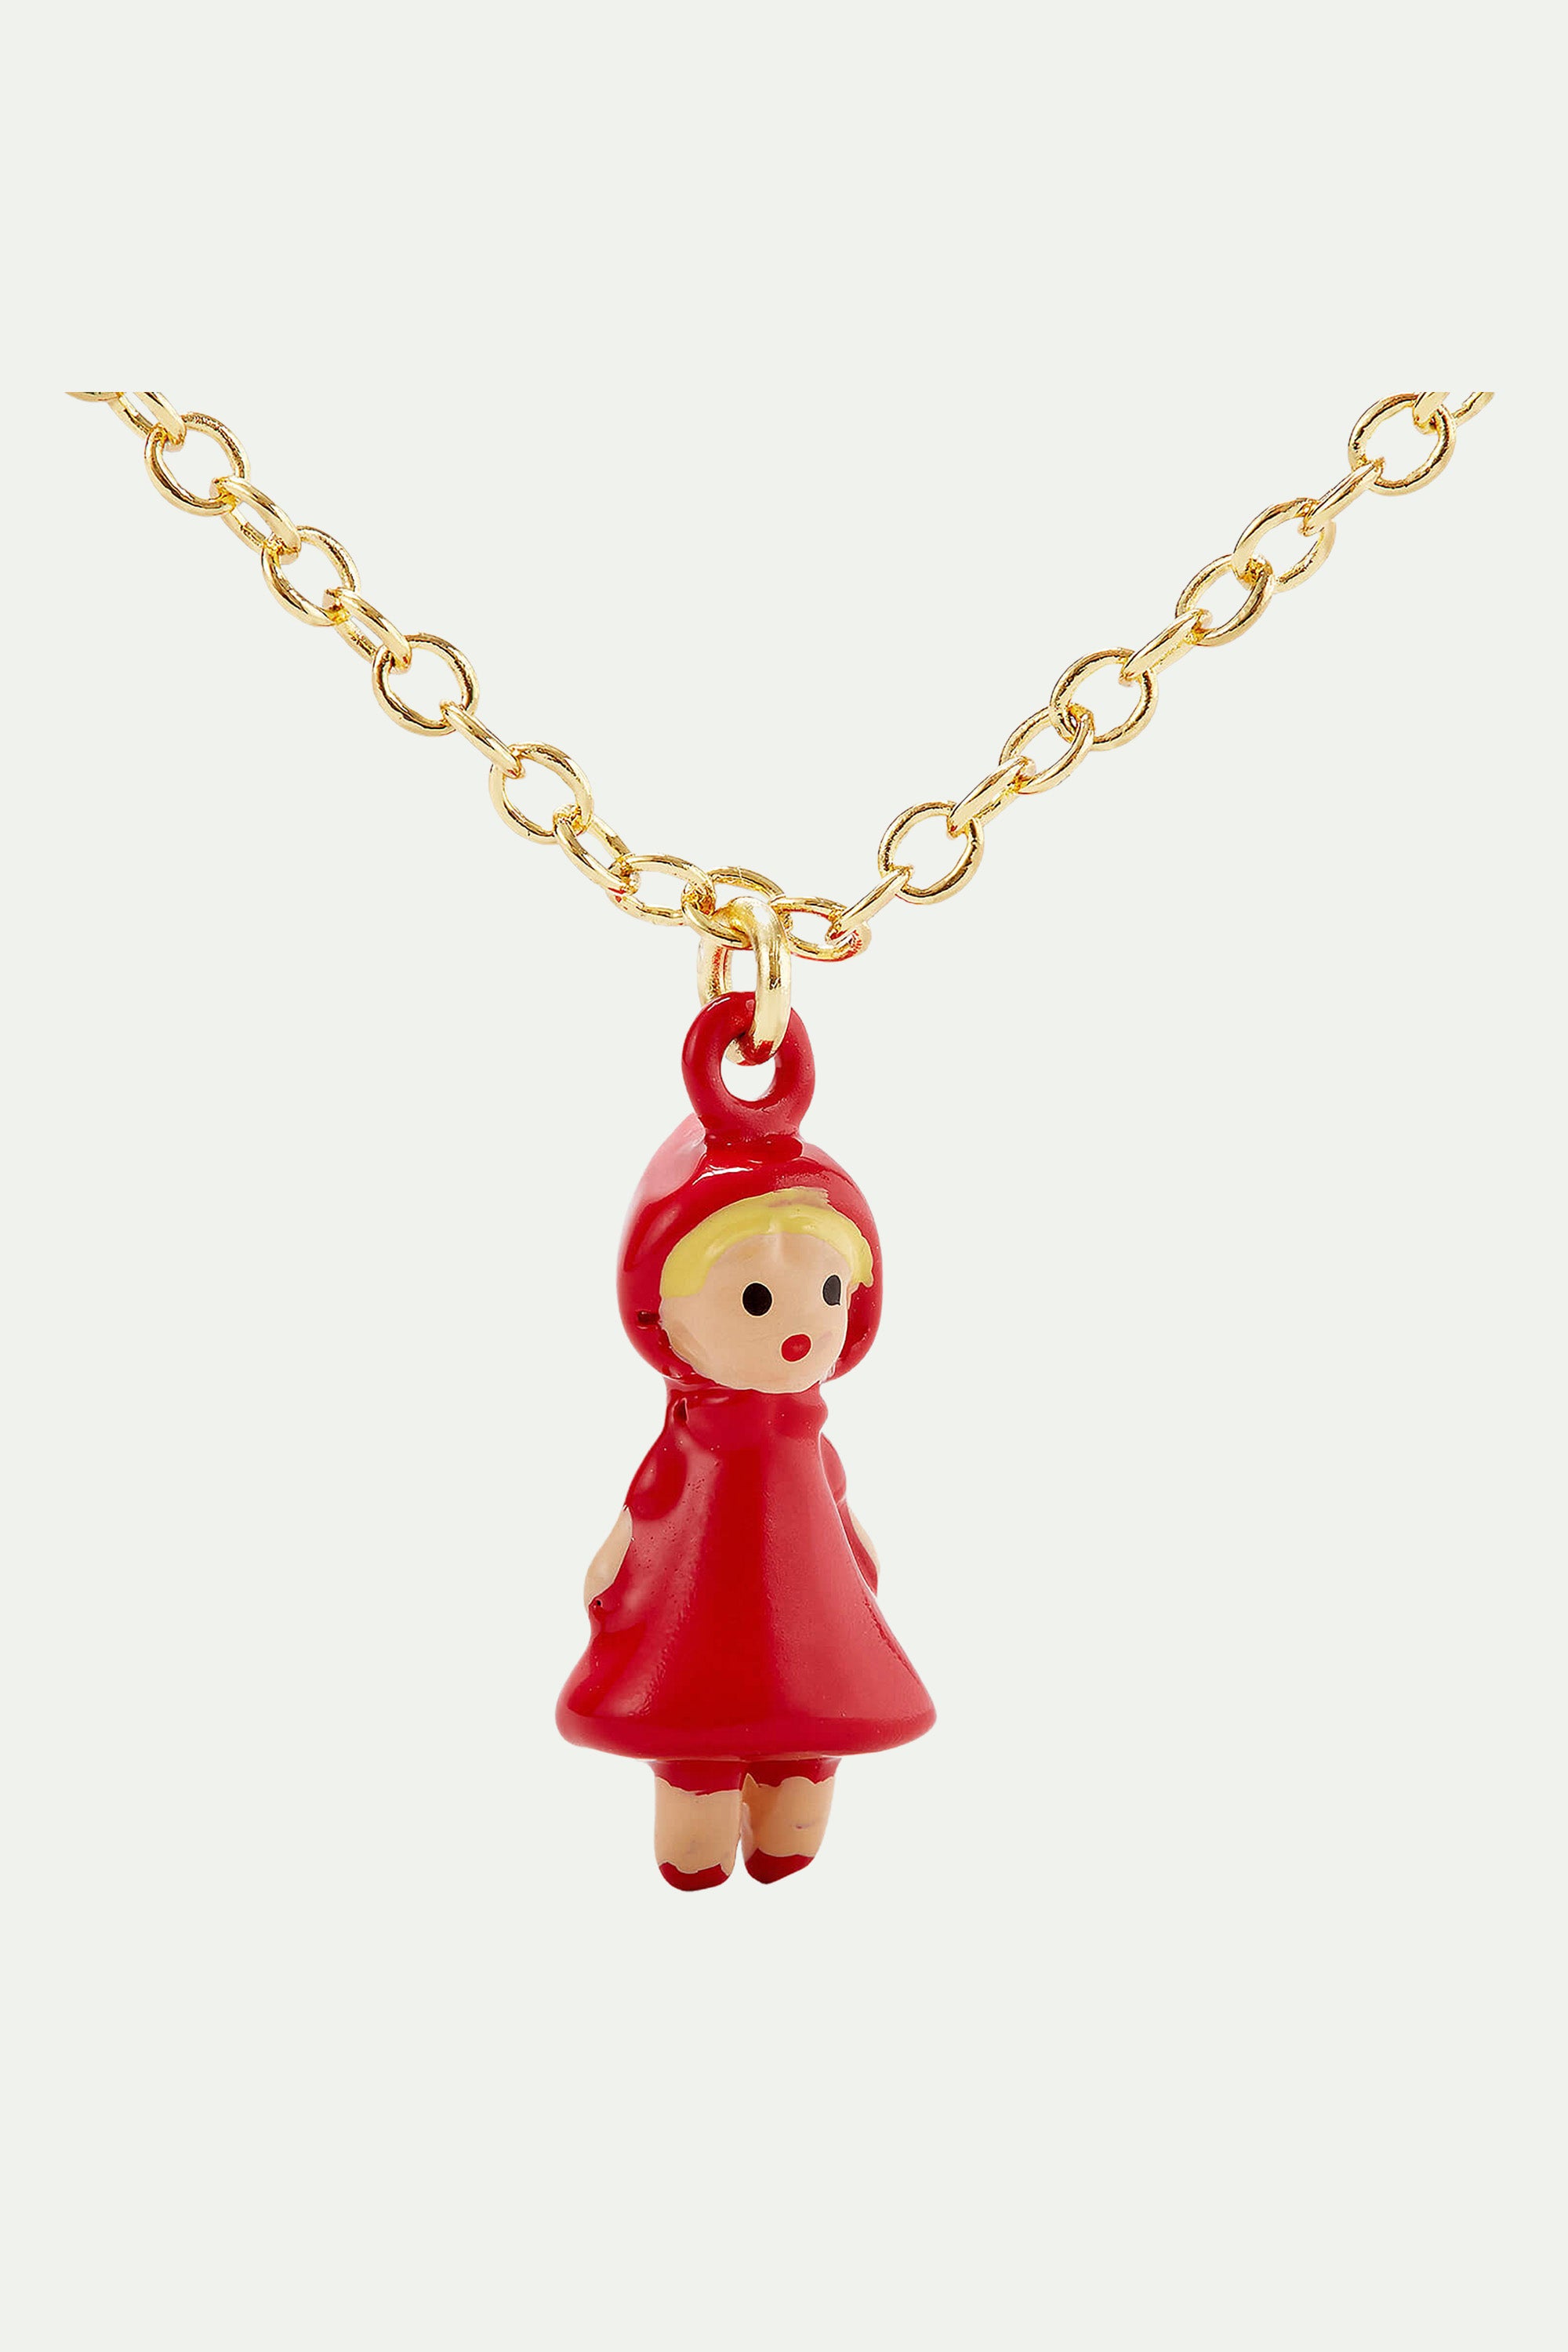 Little Red Riding Hood Picnic pendant necklace